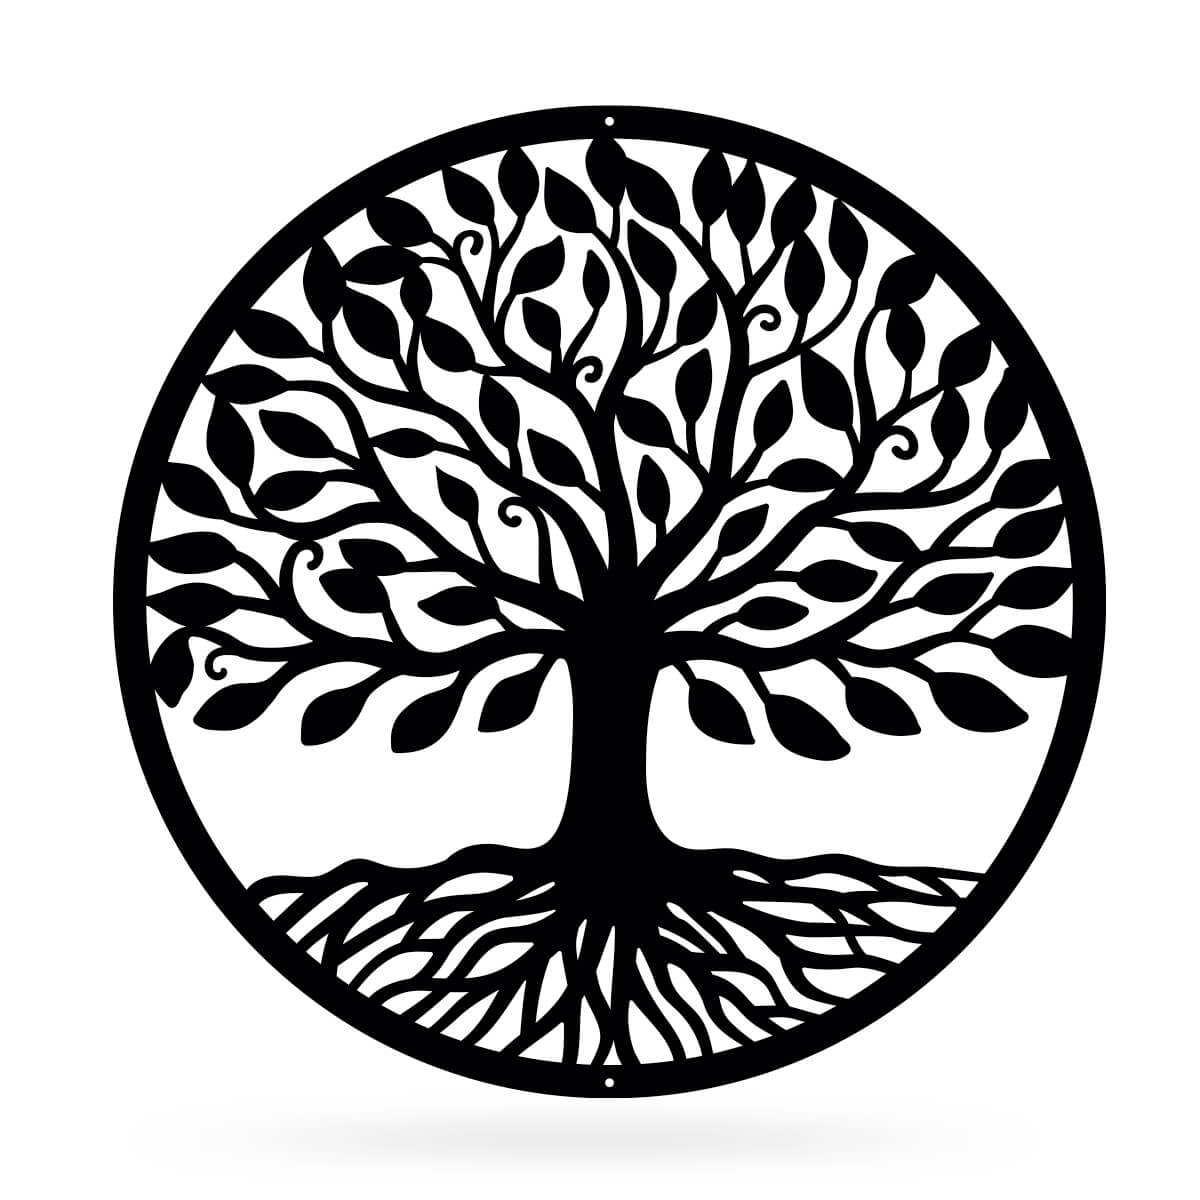 id card clipart black and white tree